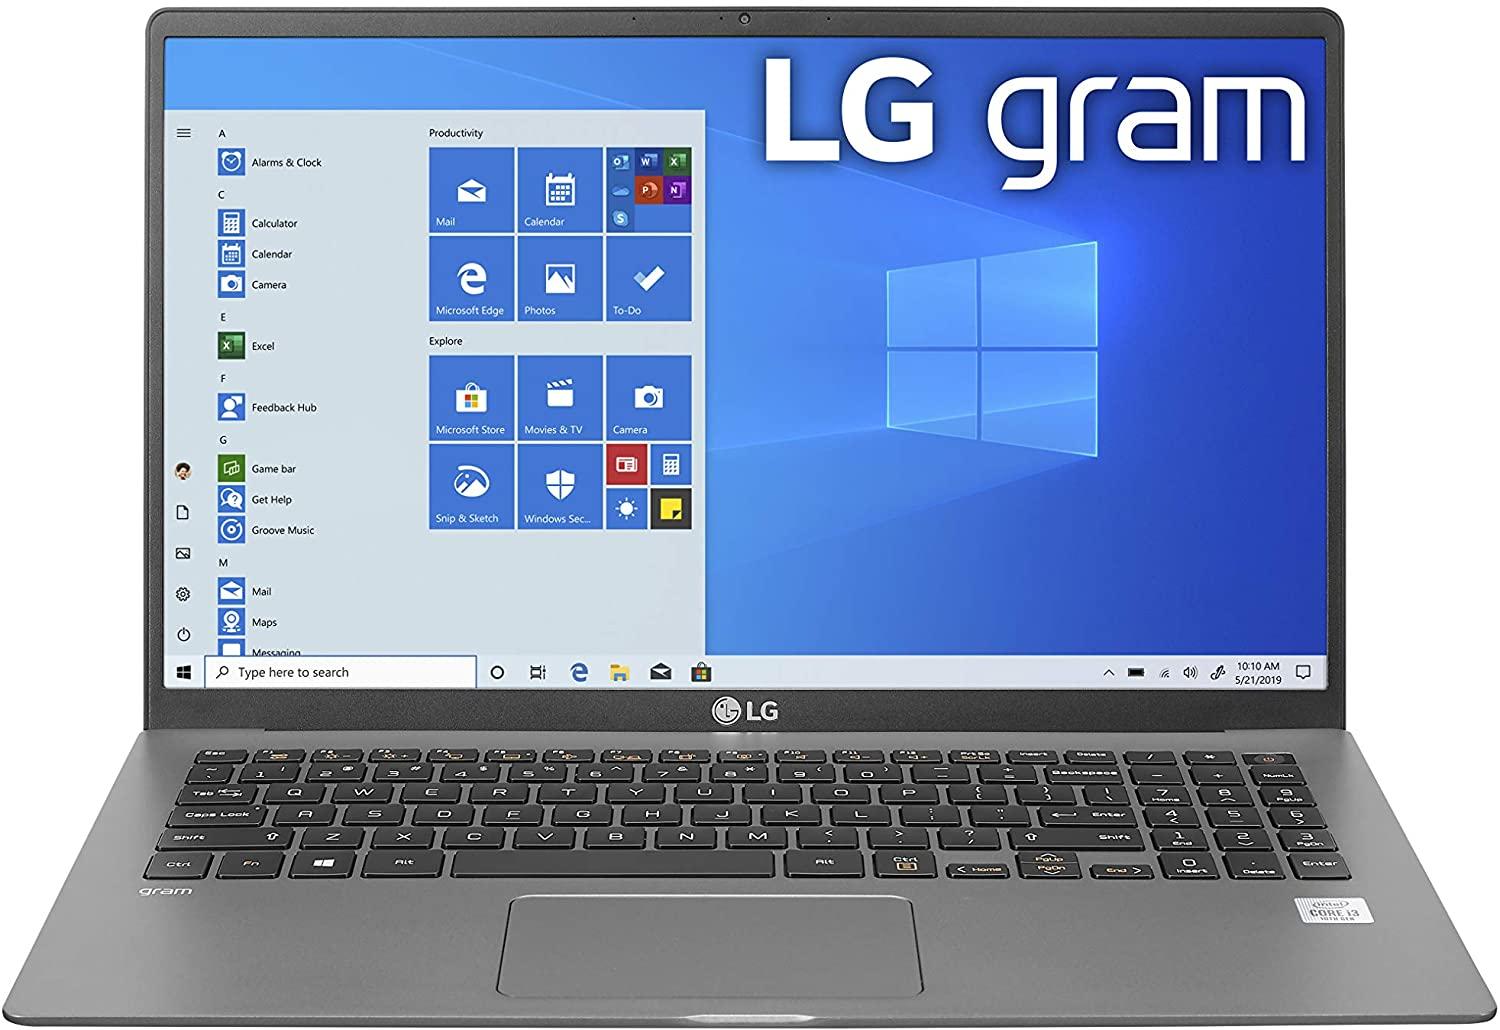 LG gram 15.6in i7 8GB 256GB Notebook Laptop for $999 Shipped